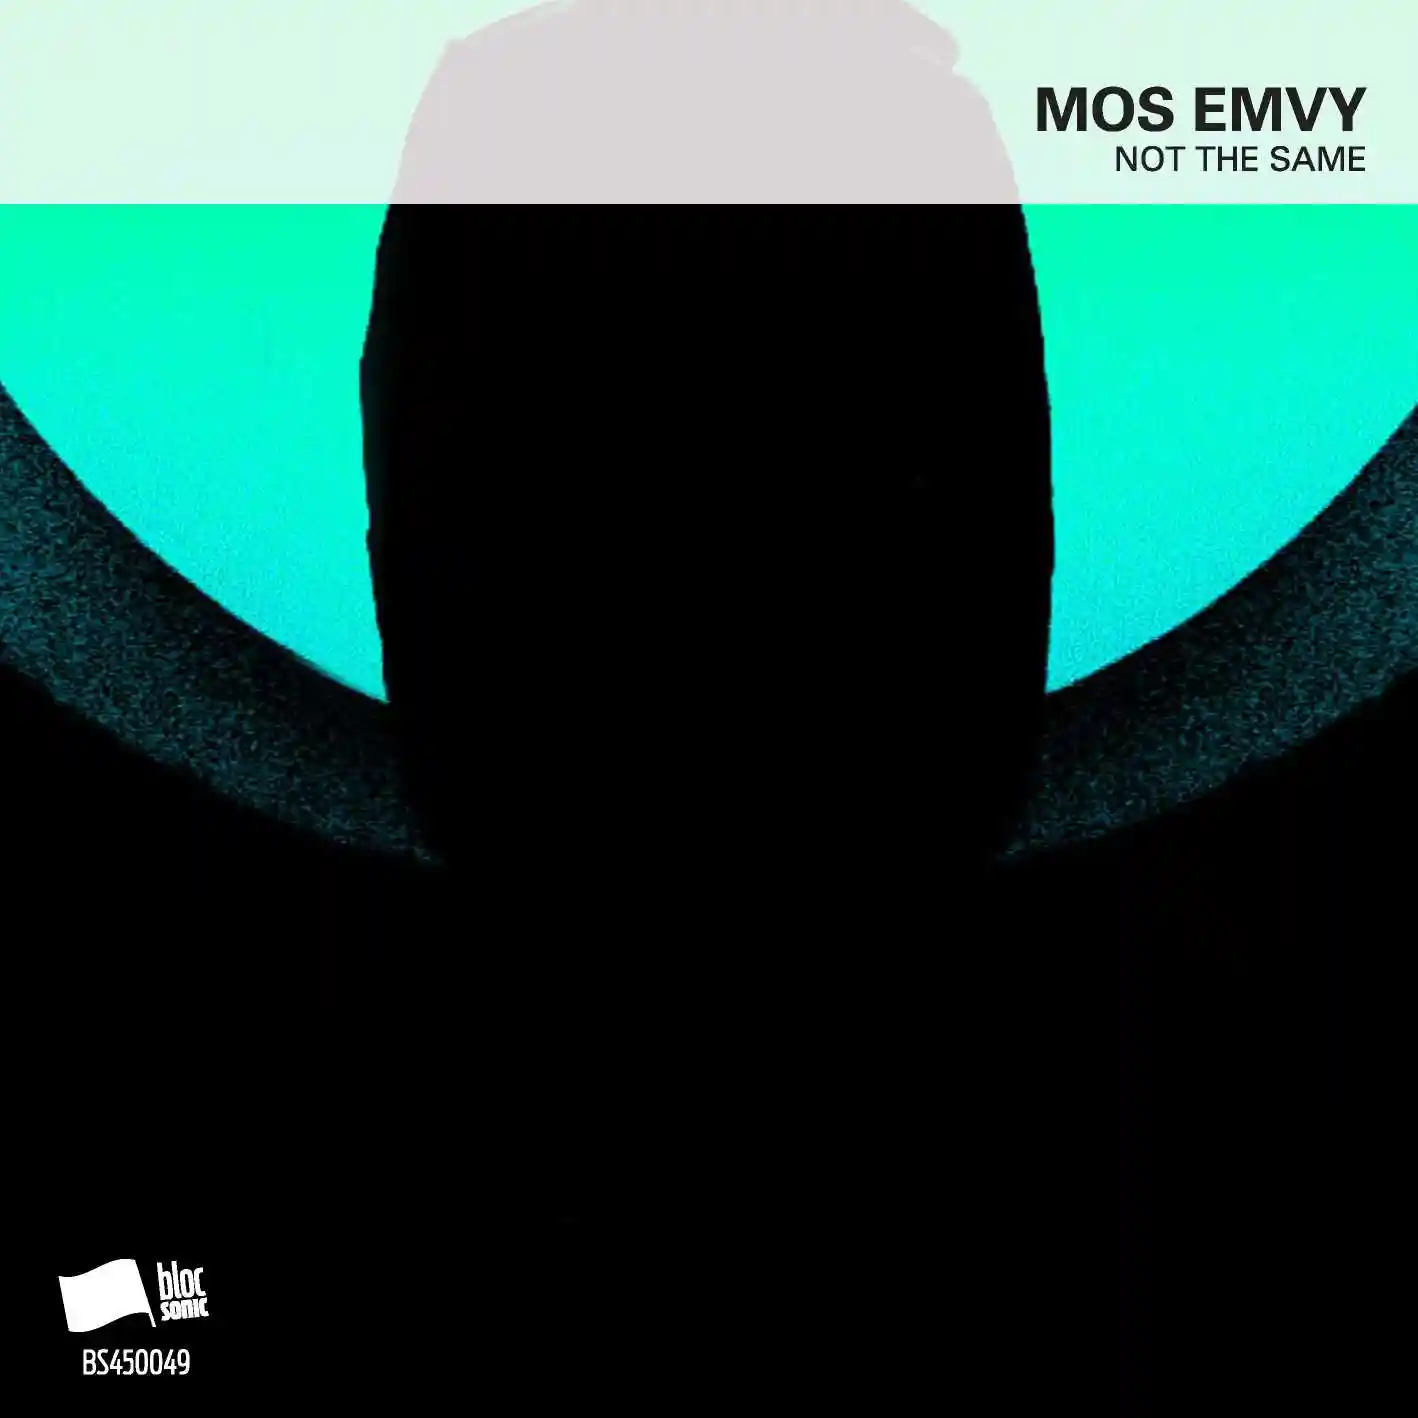 Album cover for “Not The Same” by Mos Emvy